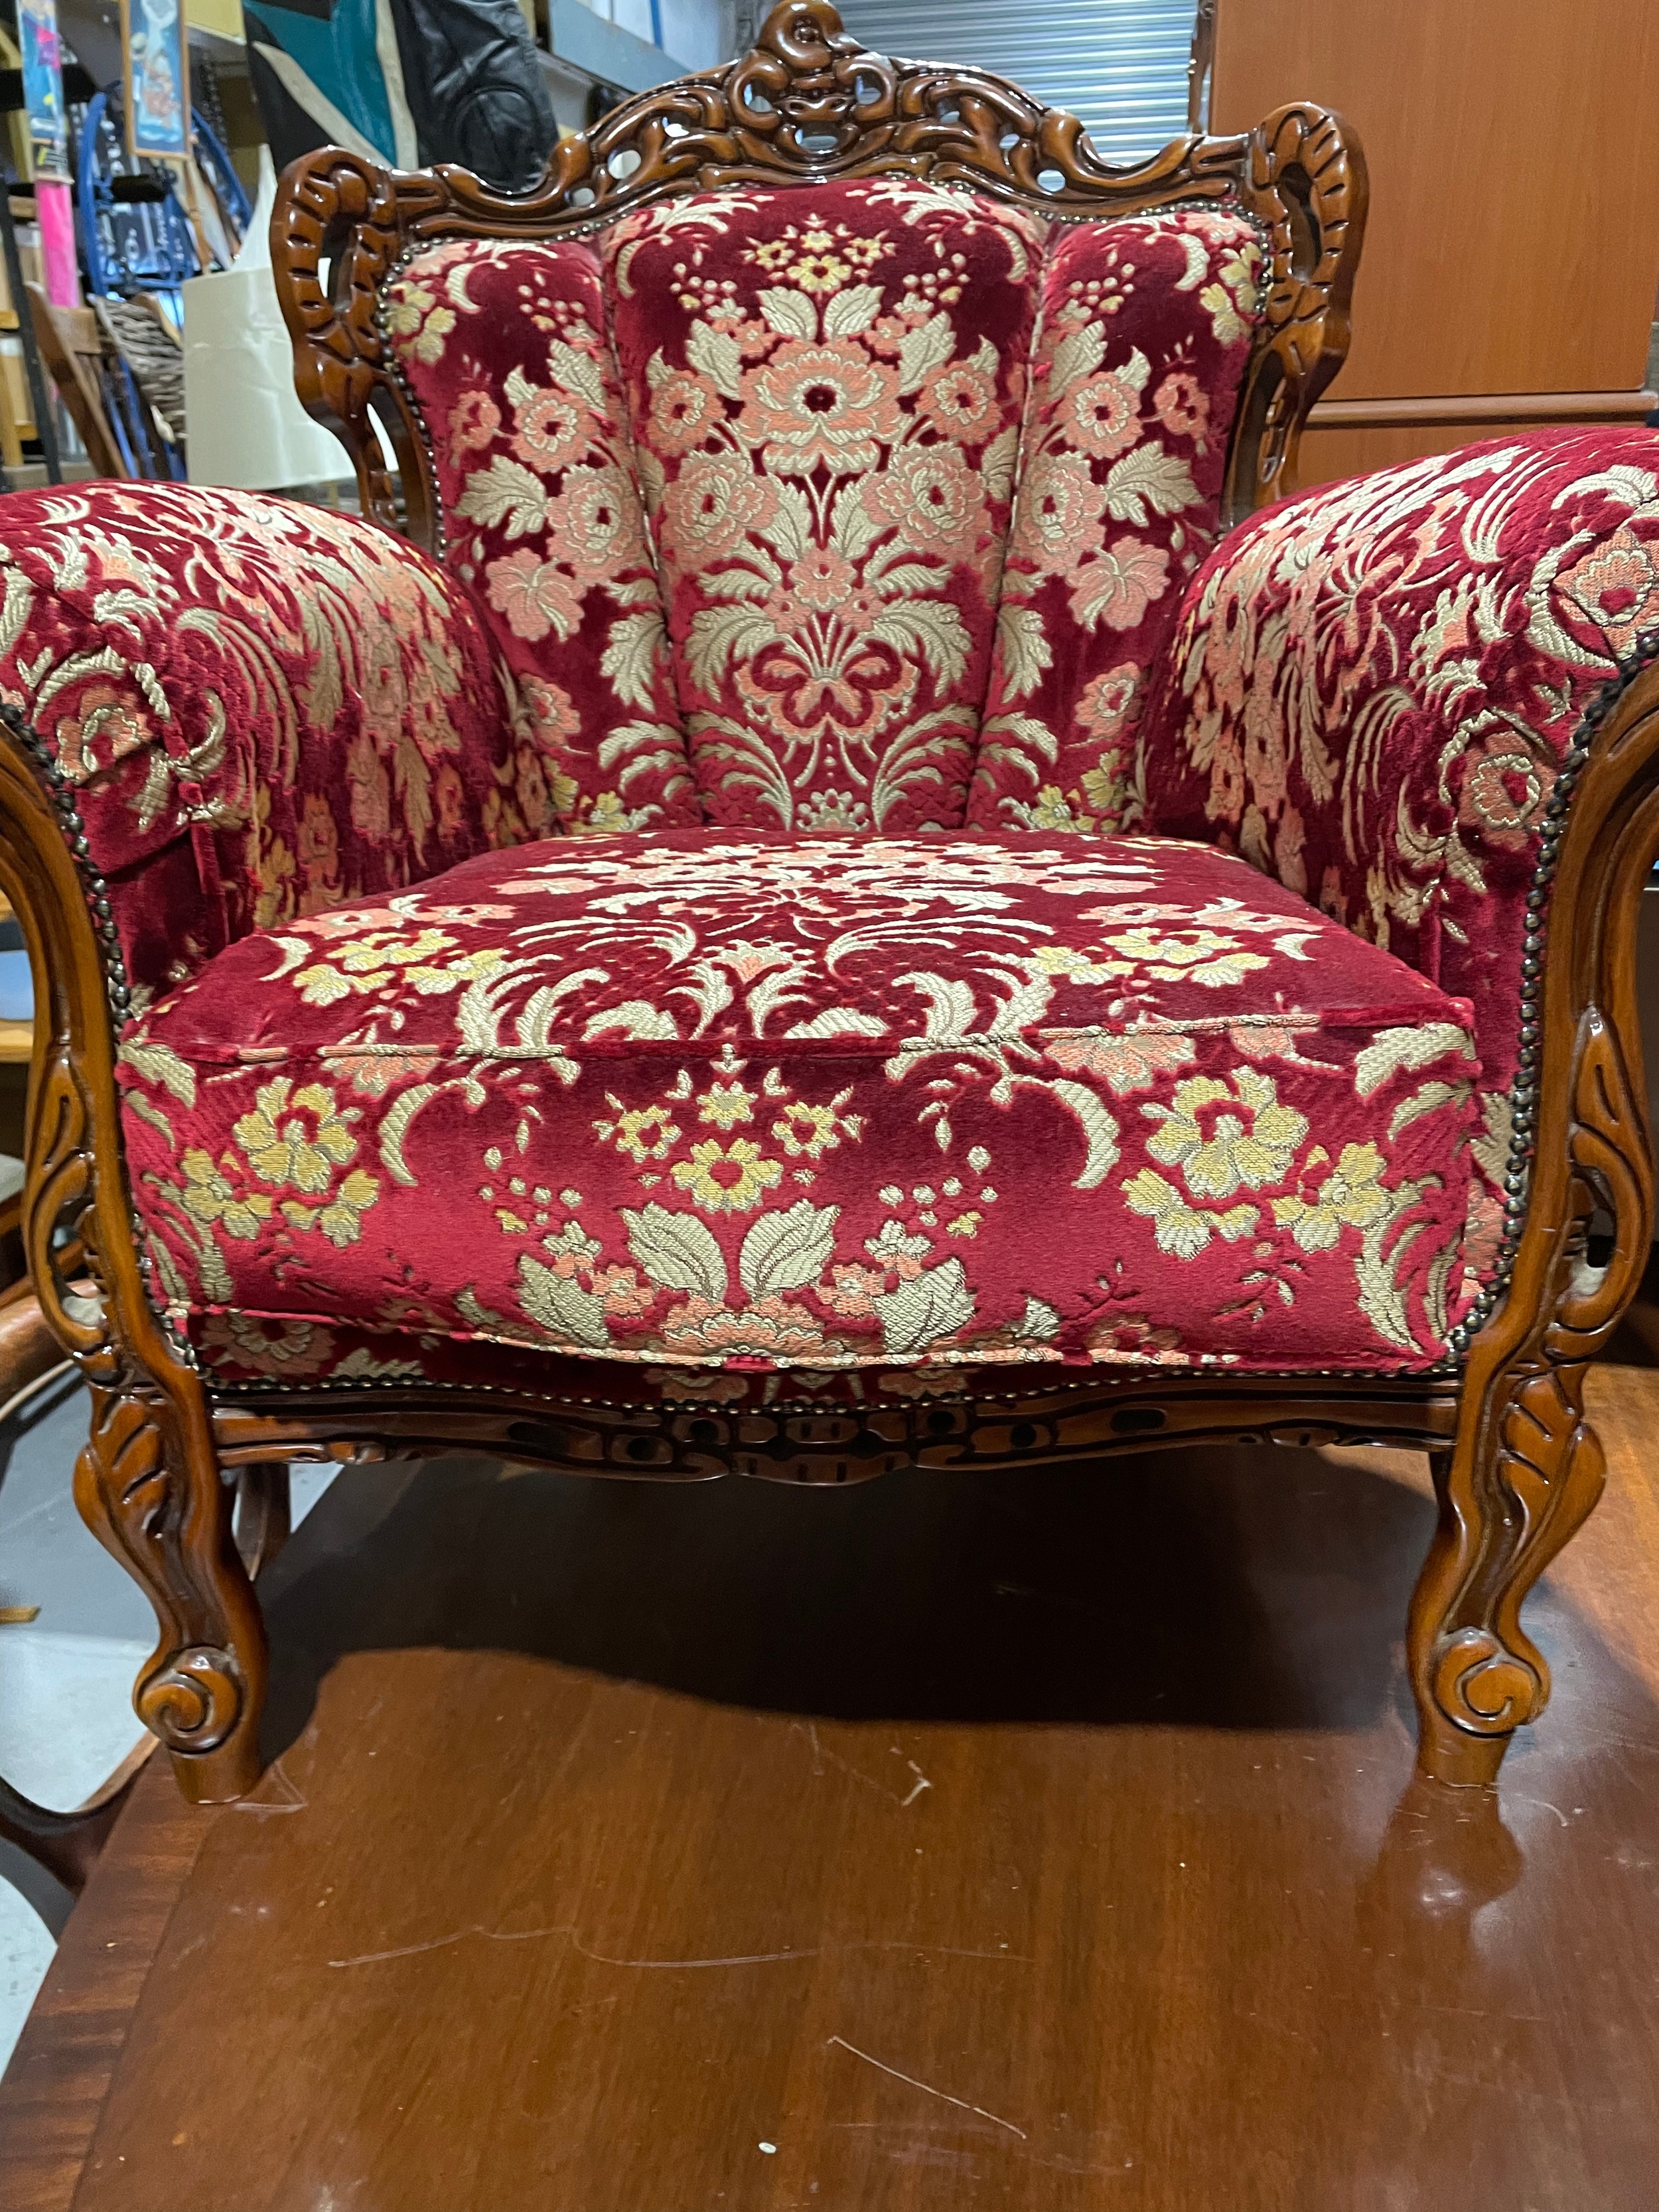 3 piece carved front room sofa set with red floral pattern - Image 2 of 3